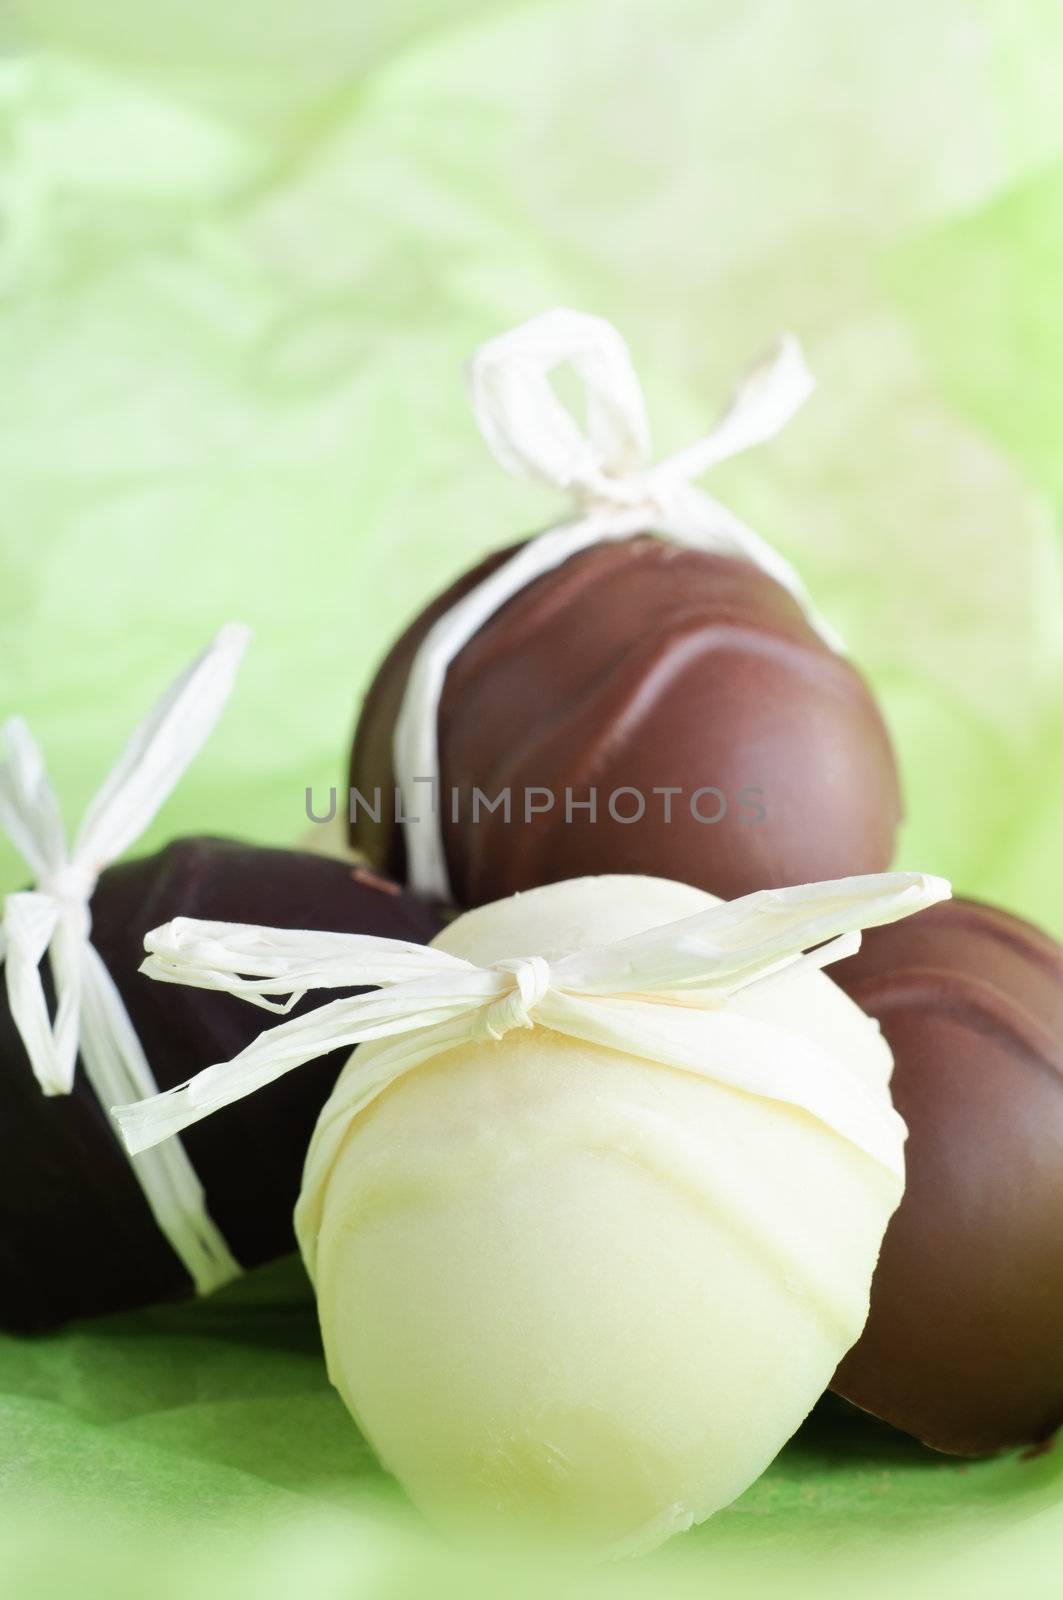 A group of home made egg shaped Easter chocolates, bow tied with raffia ribbon on a fresh, light Spring green background.